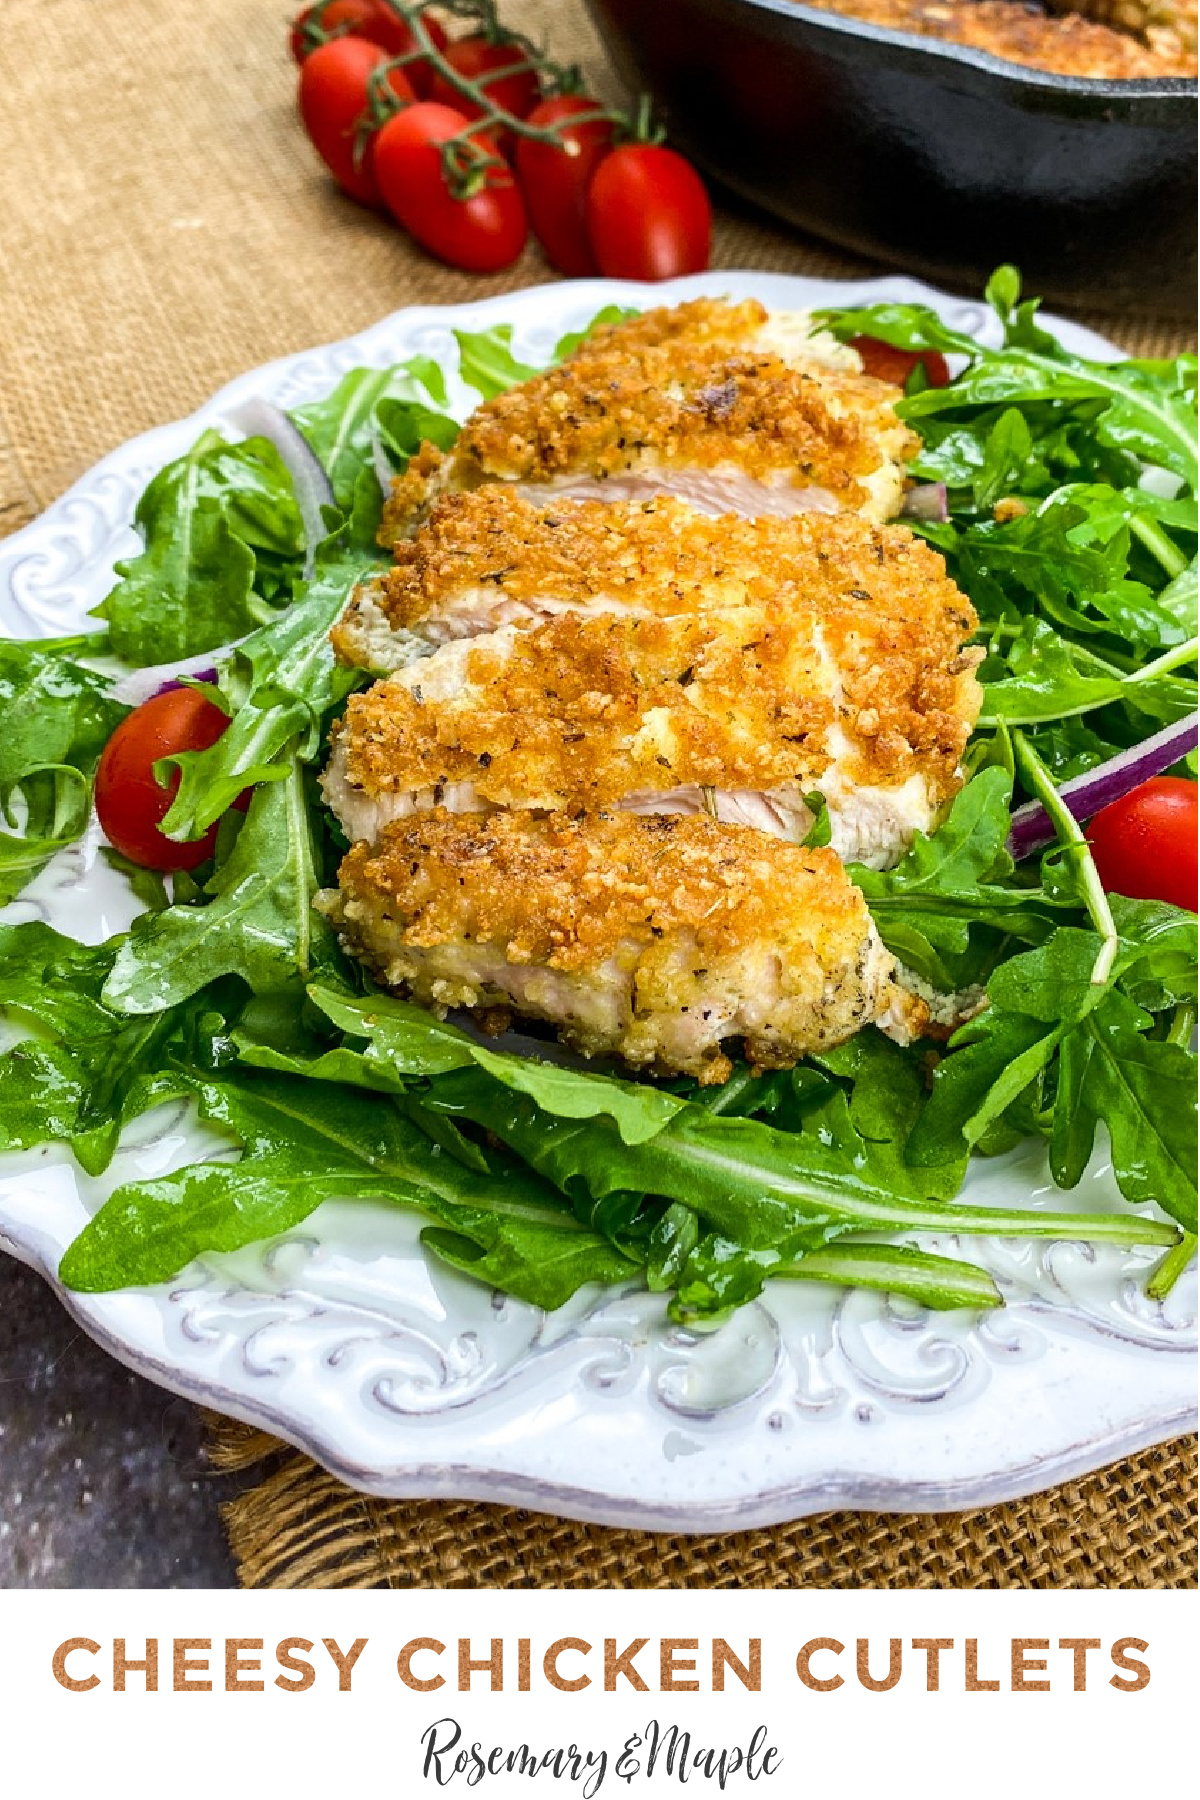 Get the recipe for this gluten free breaded chicken cutlets that's easy to prepare, tastes delicious and can be made low carb.